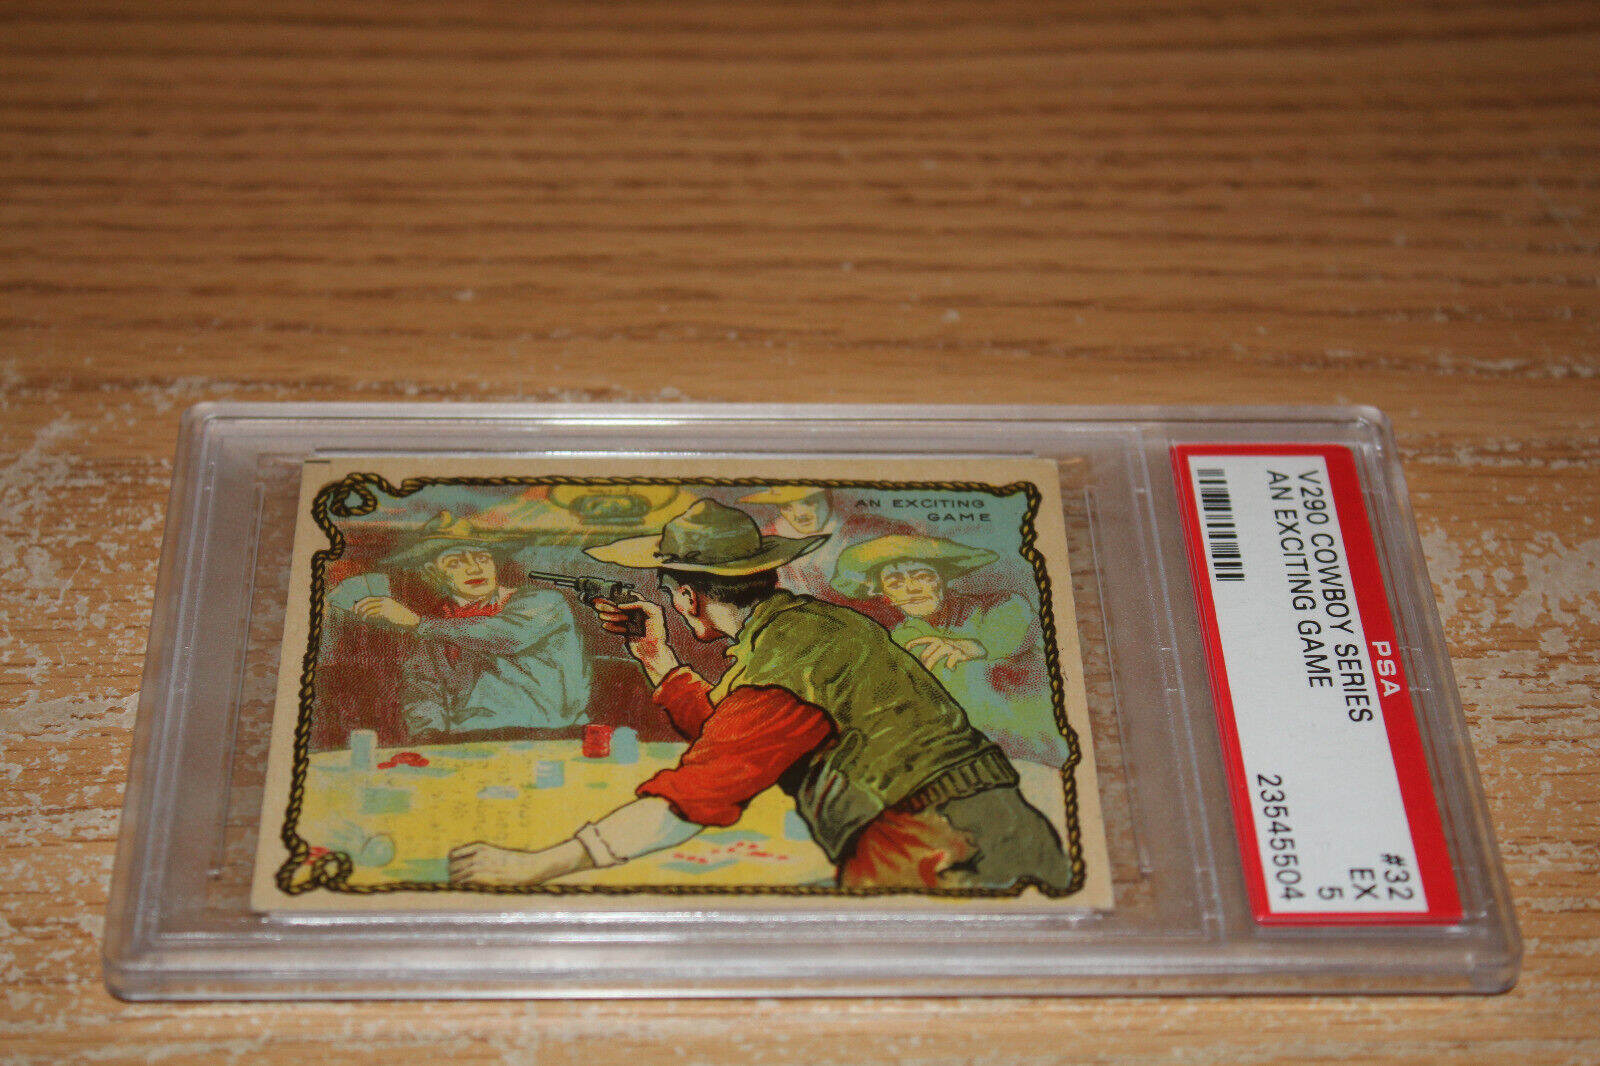 1930 PSA 5  V290 Cowboy Series An Exciting Game ..# 32